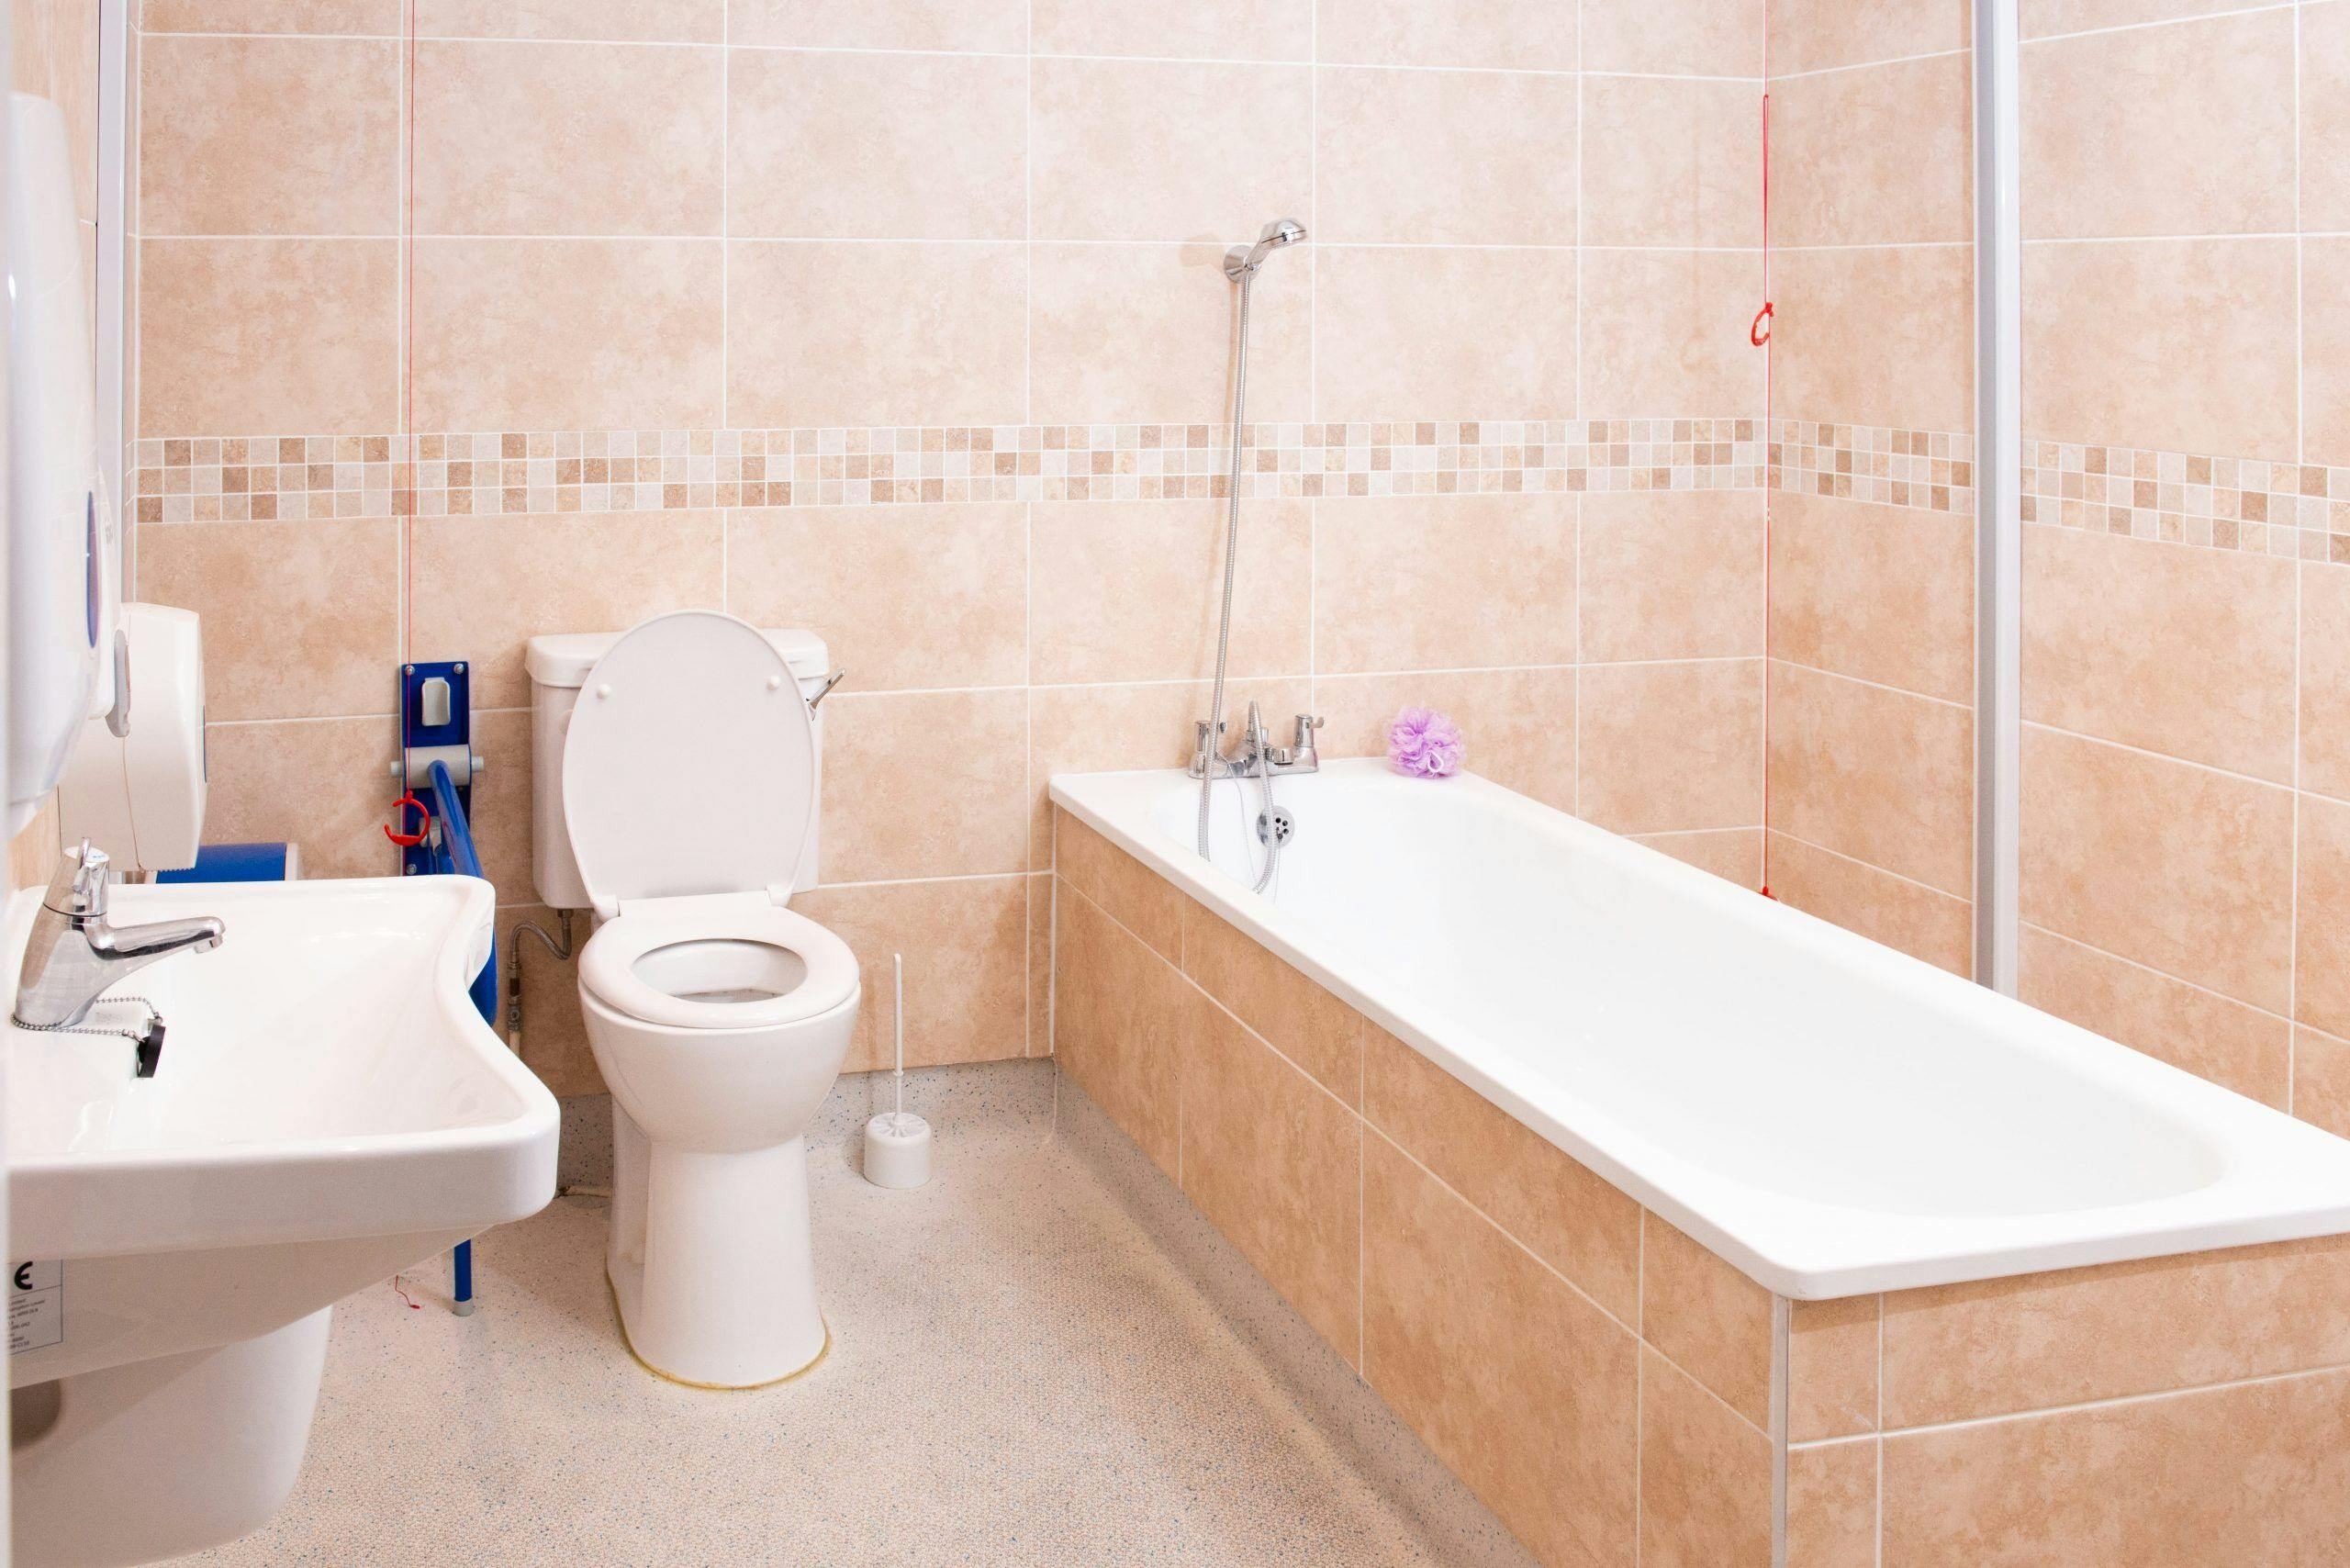 Bathroom of The King William Care Home in Ripley, Derbyshire